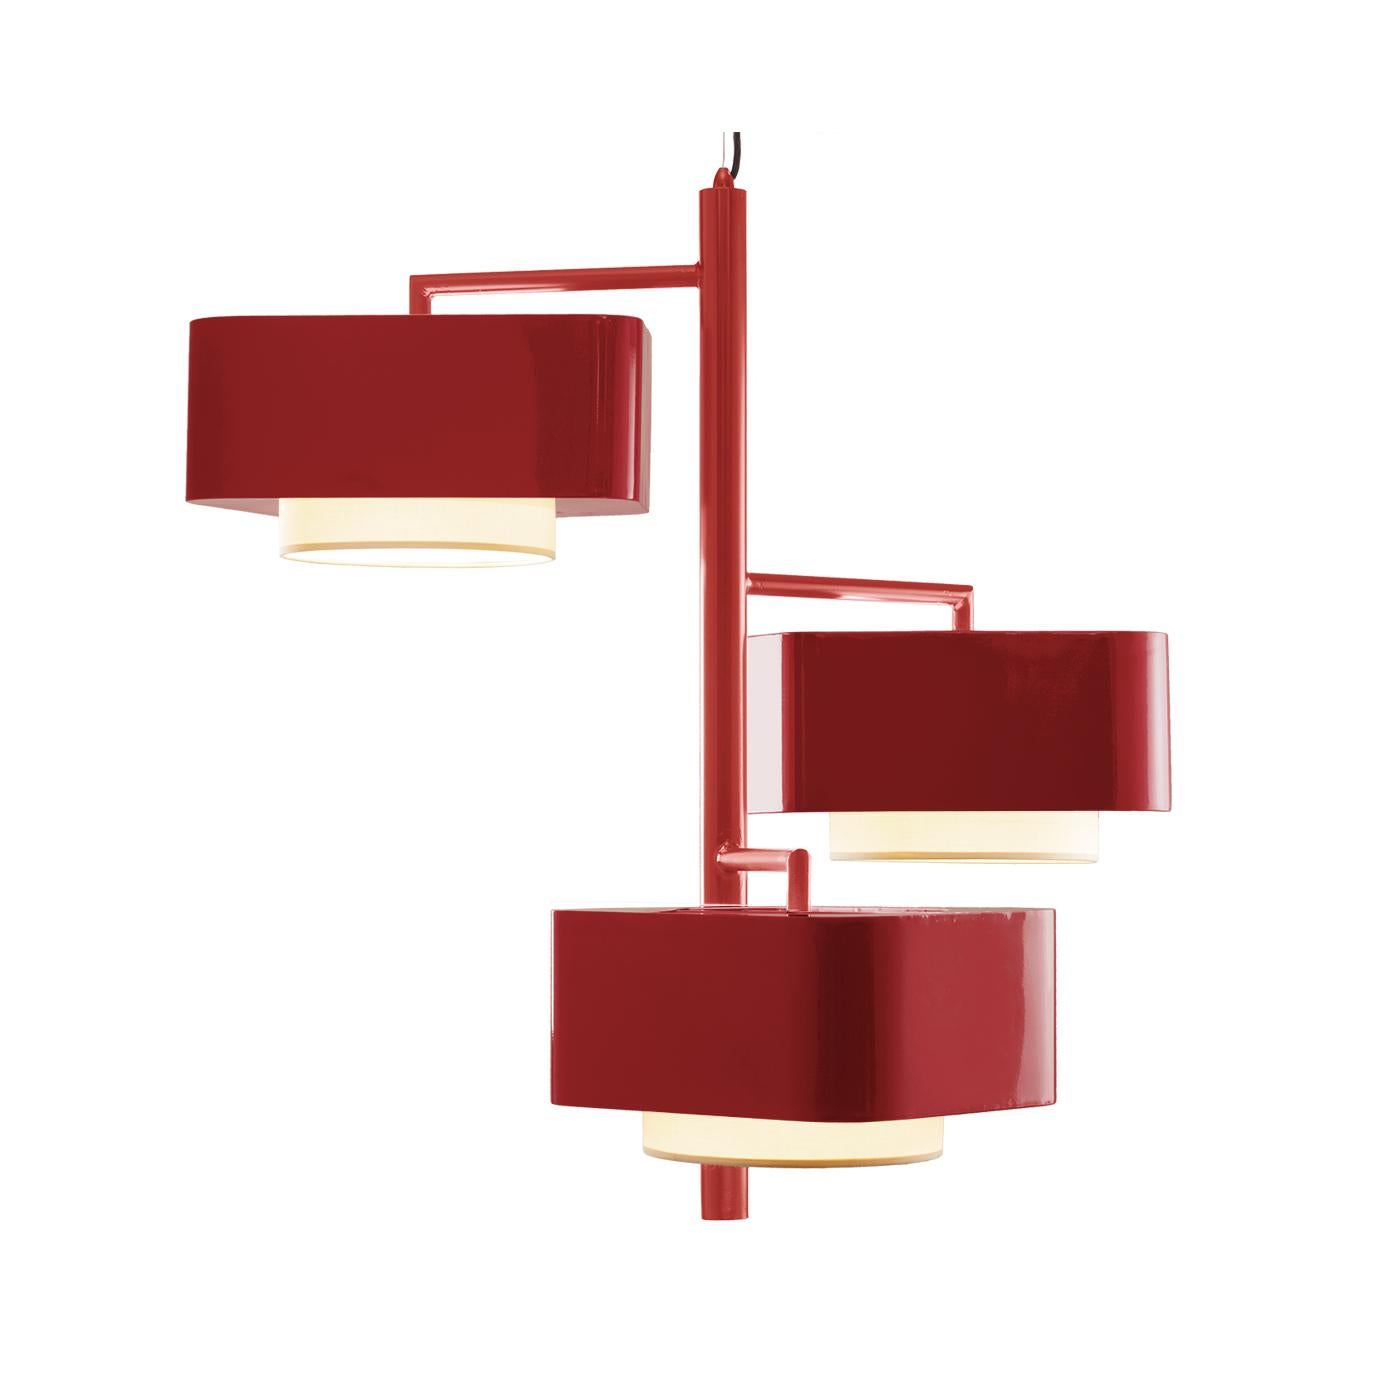 Contemporary Art Deco inspired Carousel I Pendant Lamp in Lipstick Red For Sale